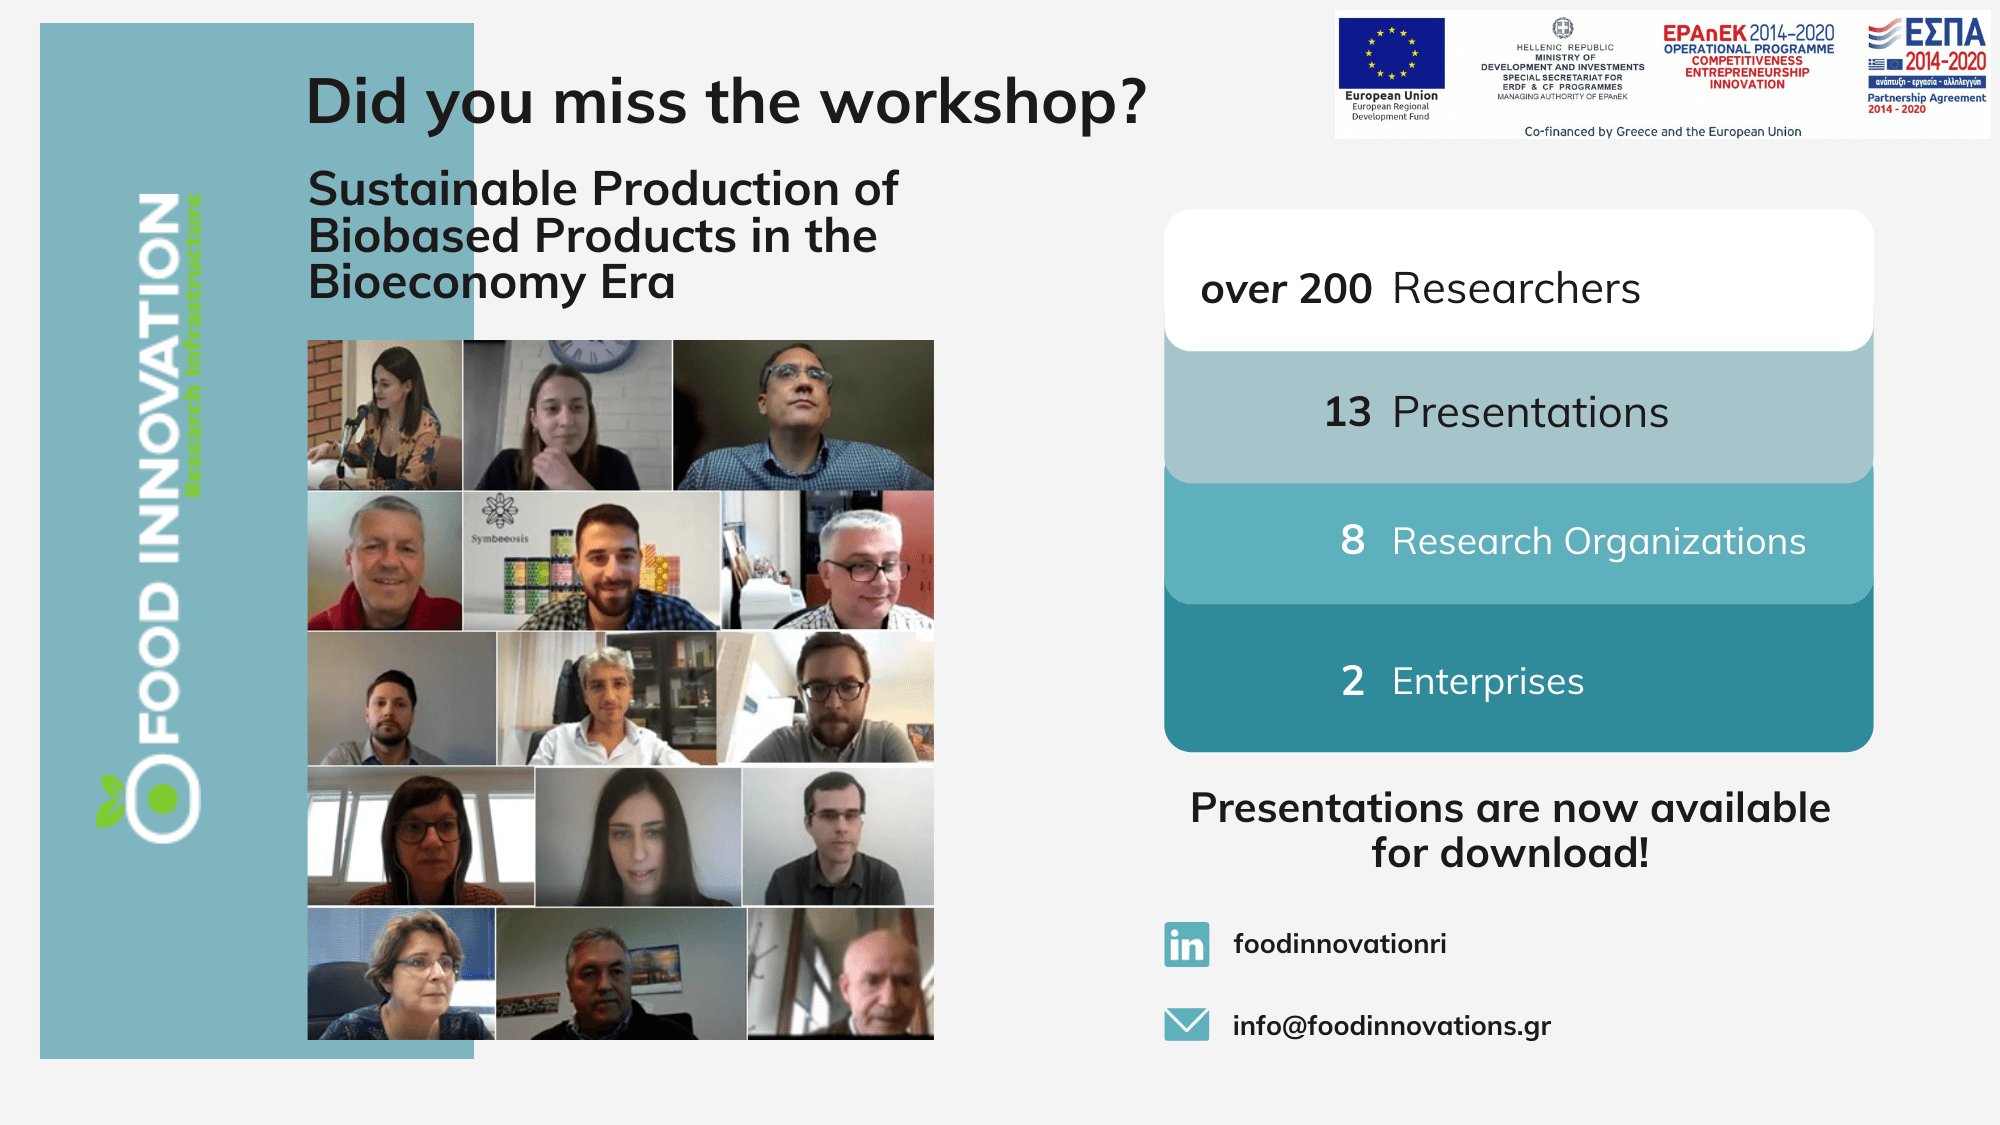  Did you miss the workshop Sustainable Production of Biobased Products in the Bioeconomy Era? 